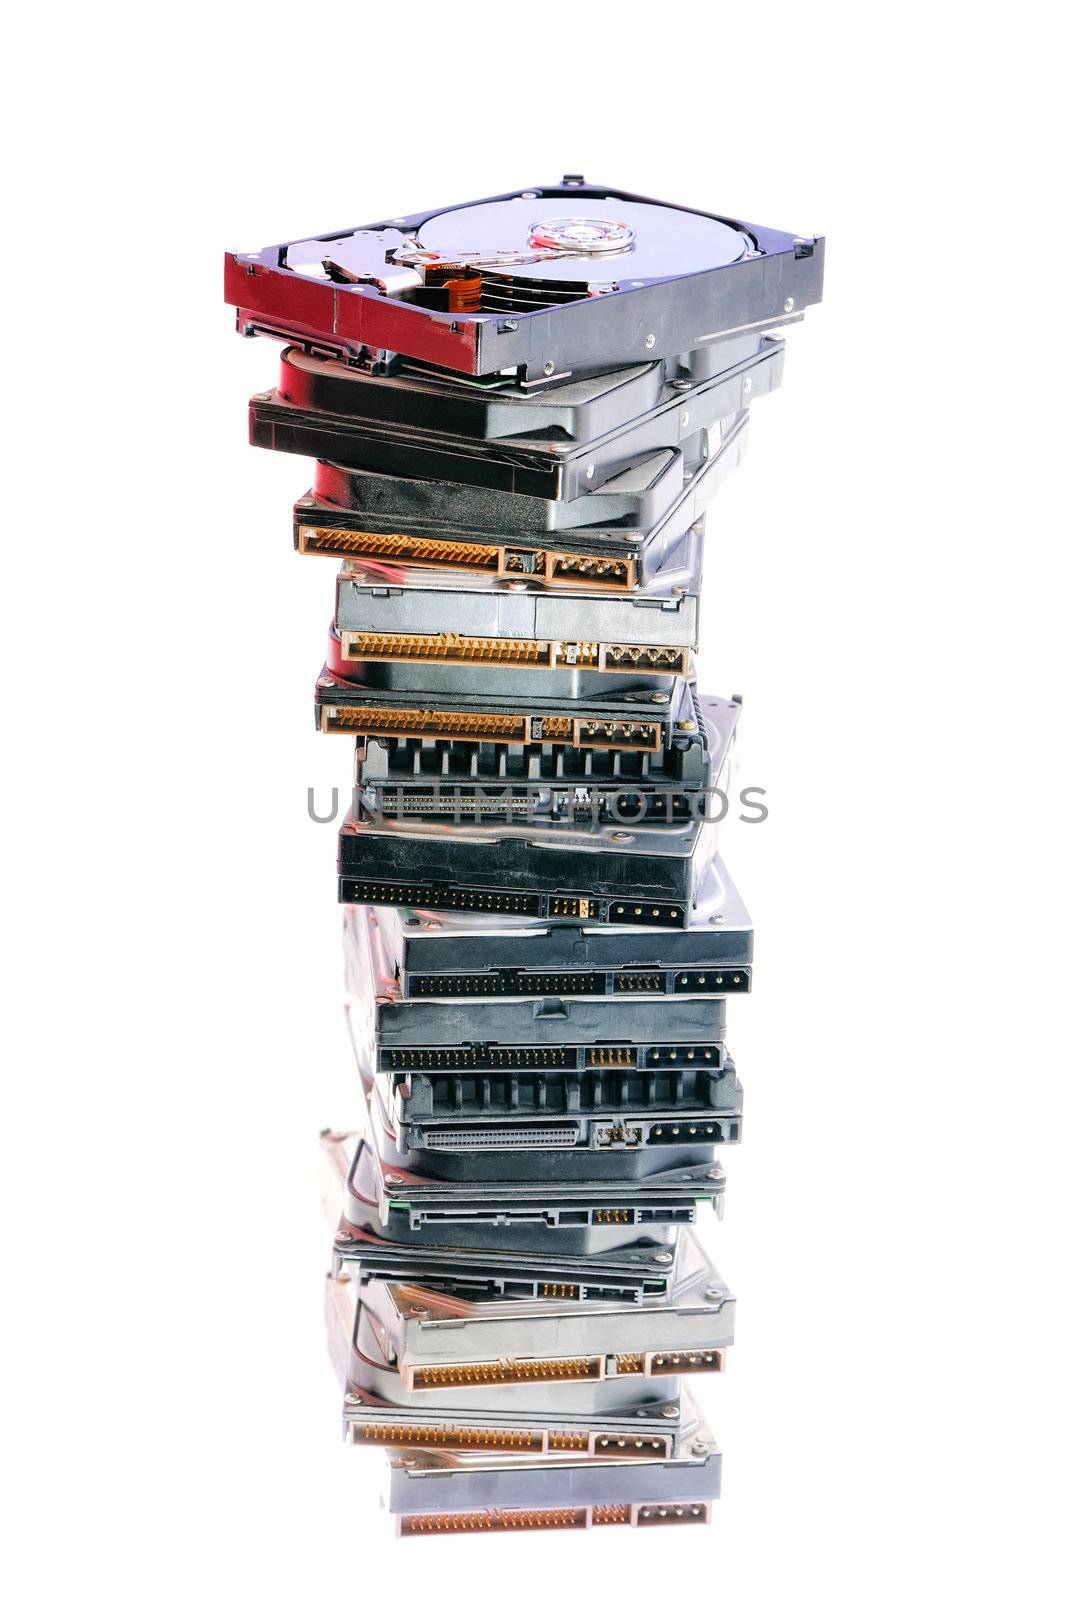 Stack of hard drives on the white background